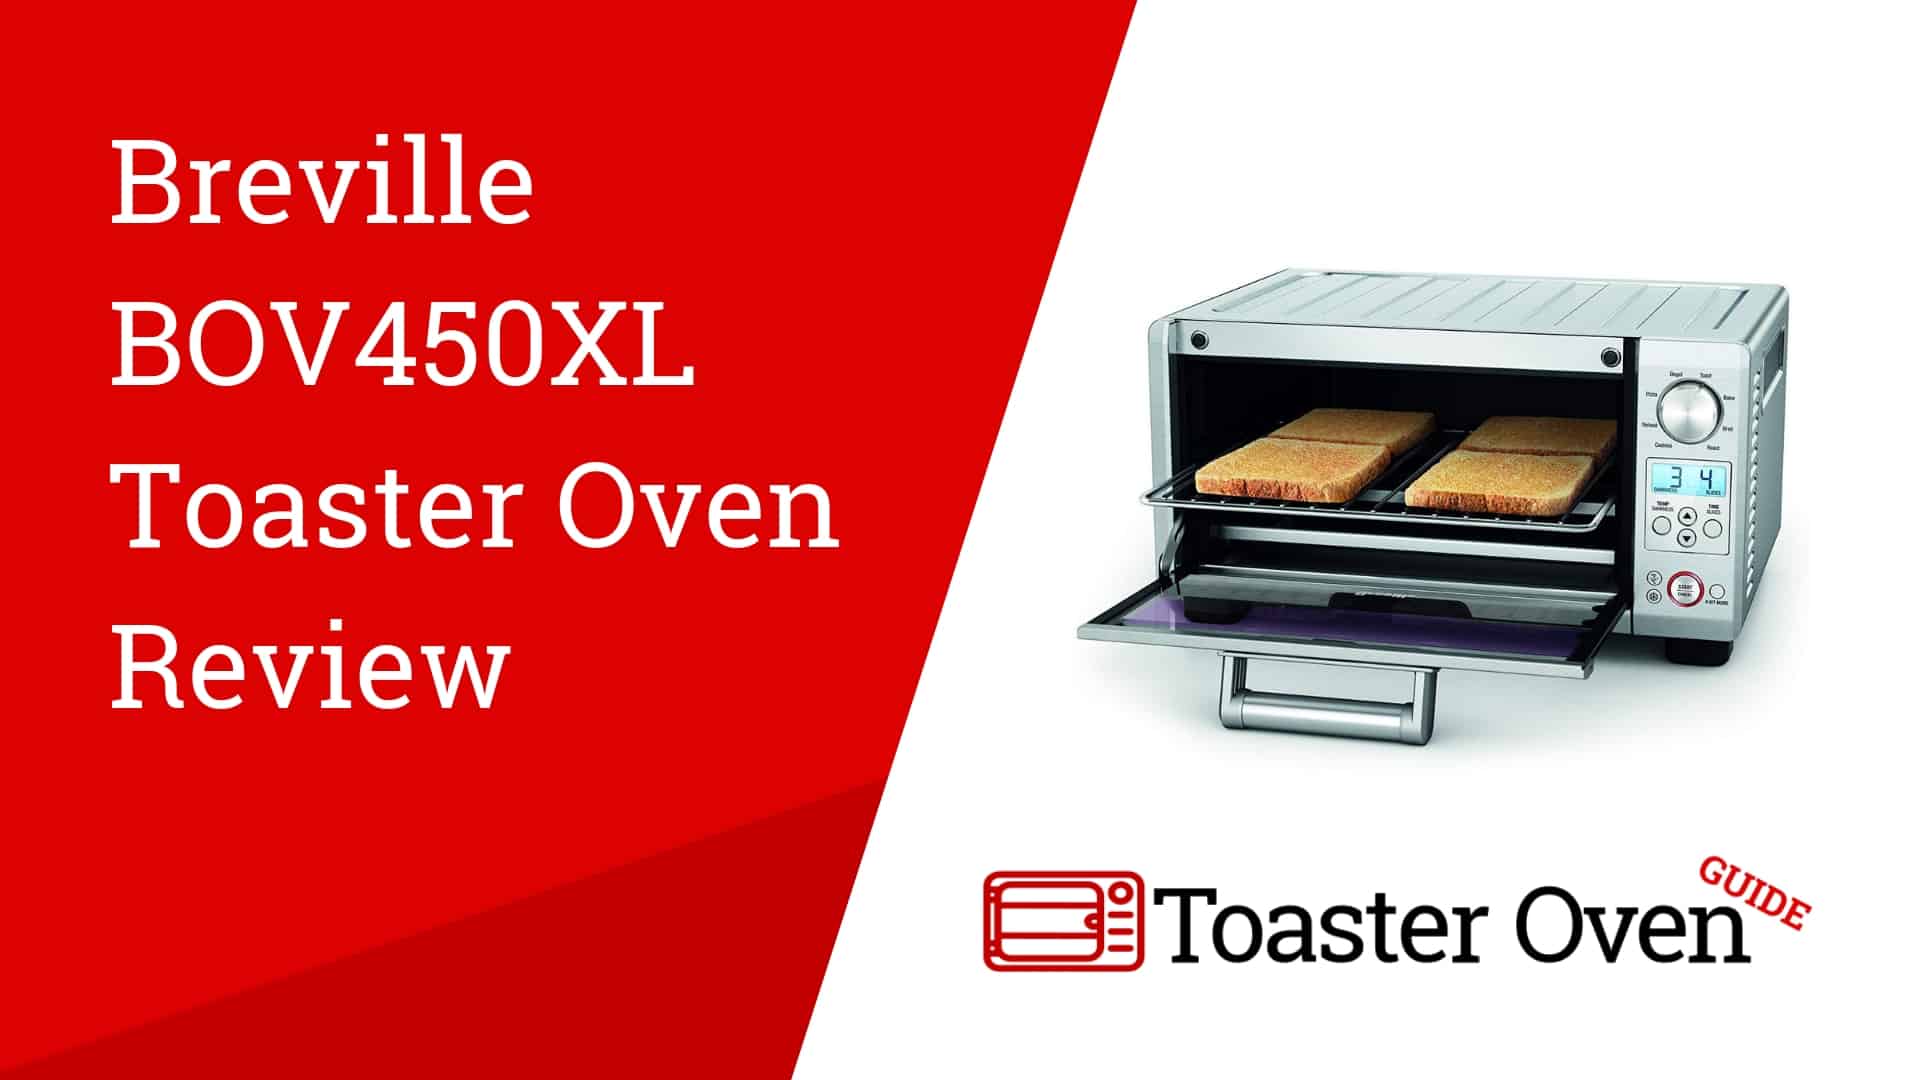 https://www.toasterovenguide.com/wp-content/uploads/2019/05/Breville-BOV450XL-Toaster-Oven-Review.jpg